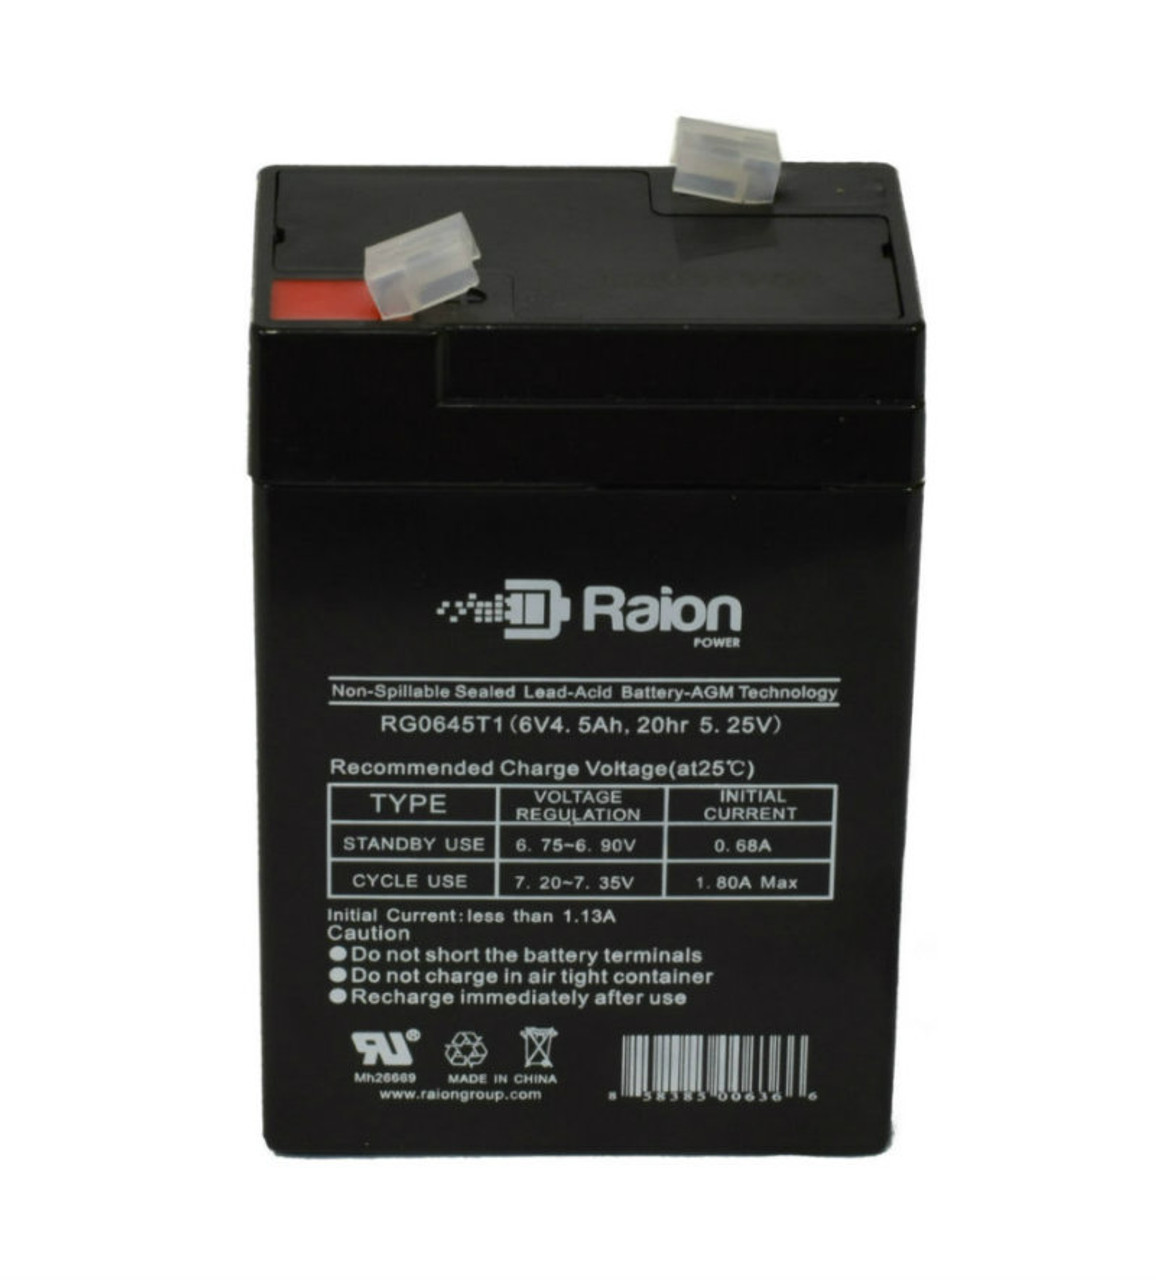 Raion Power RG0645T1 Replacement Battery Cartridge for Henglypower HL645